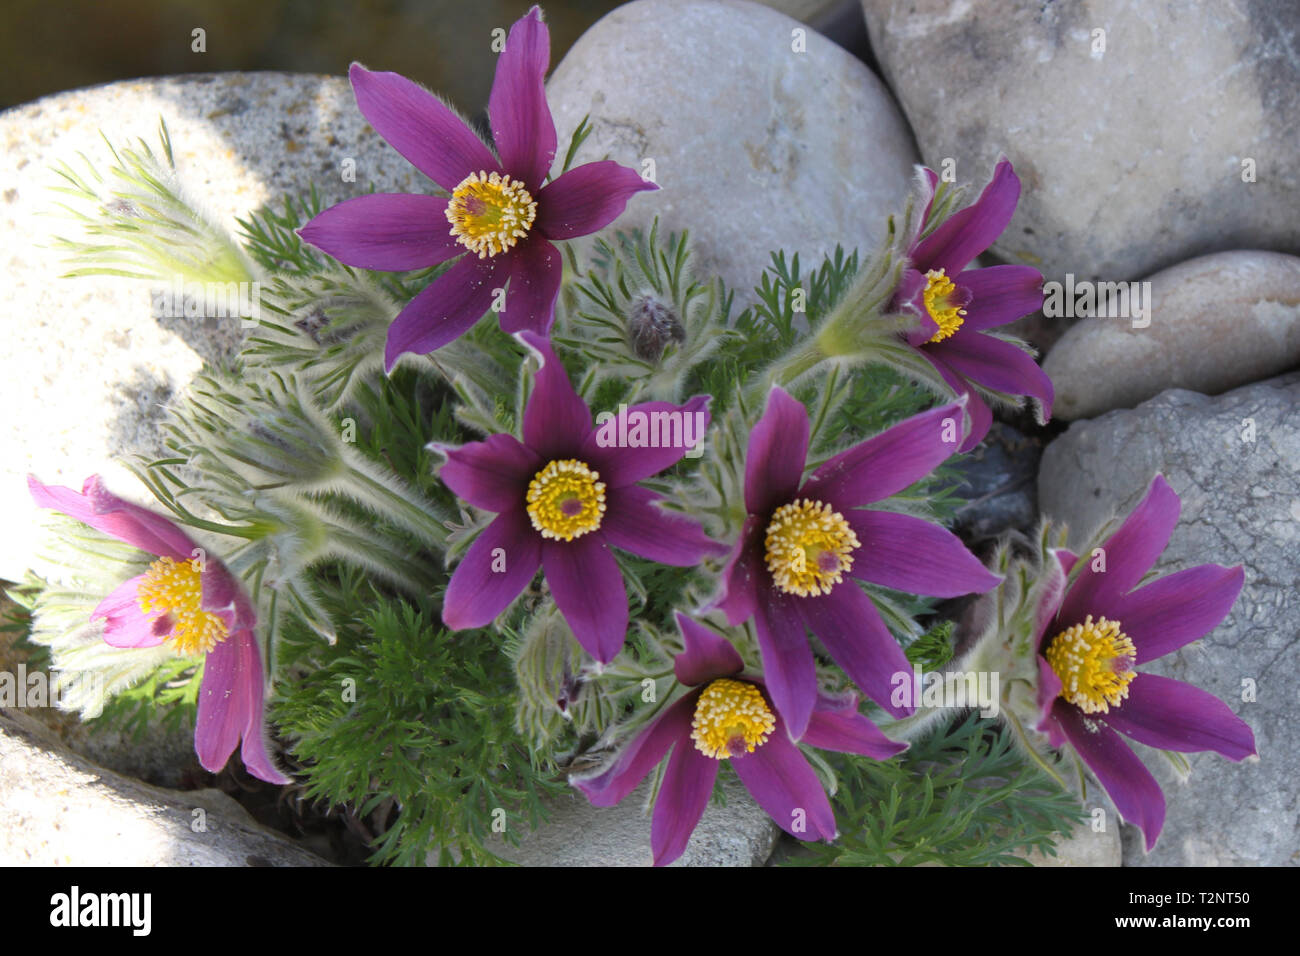 Anemone pulsatilla - first flowers of spring Stock Photo